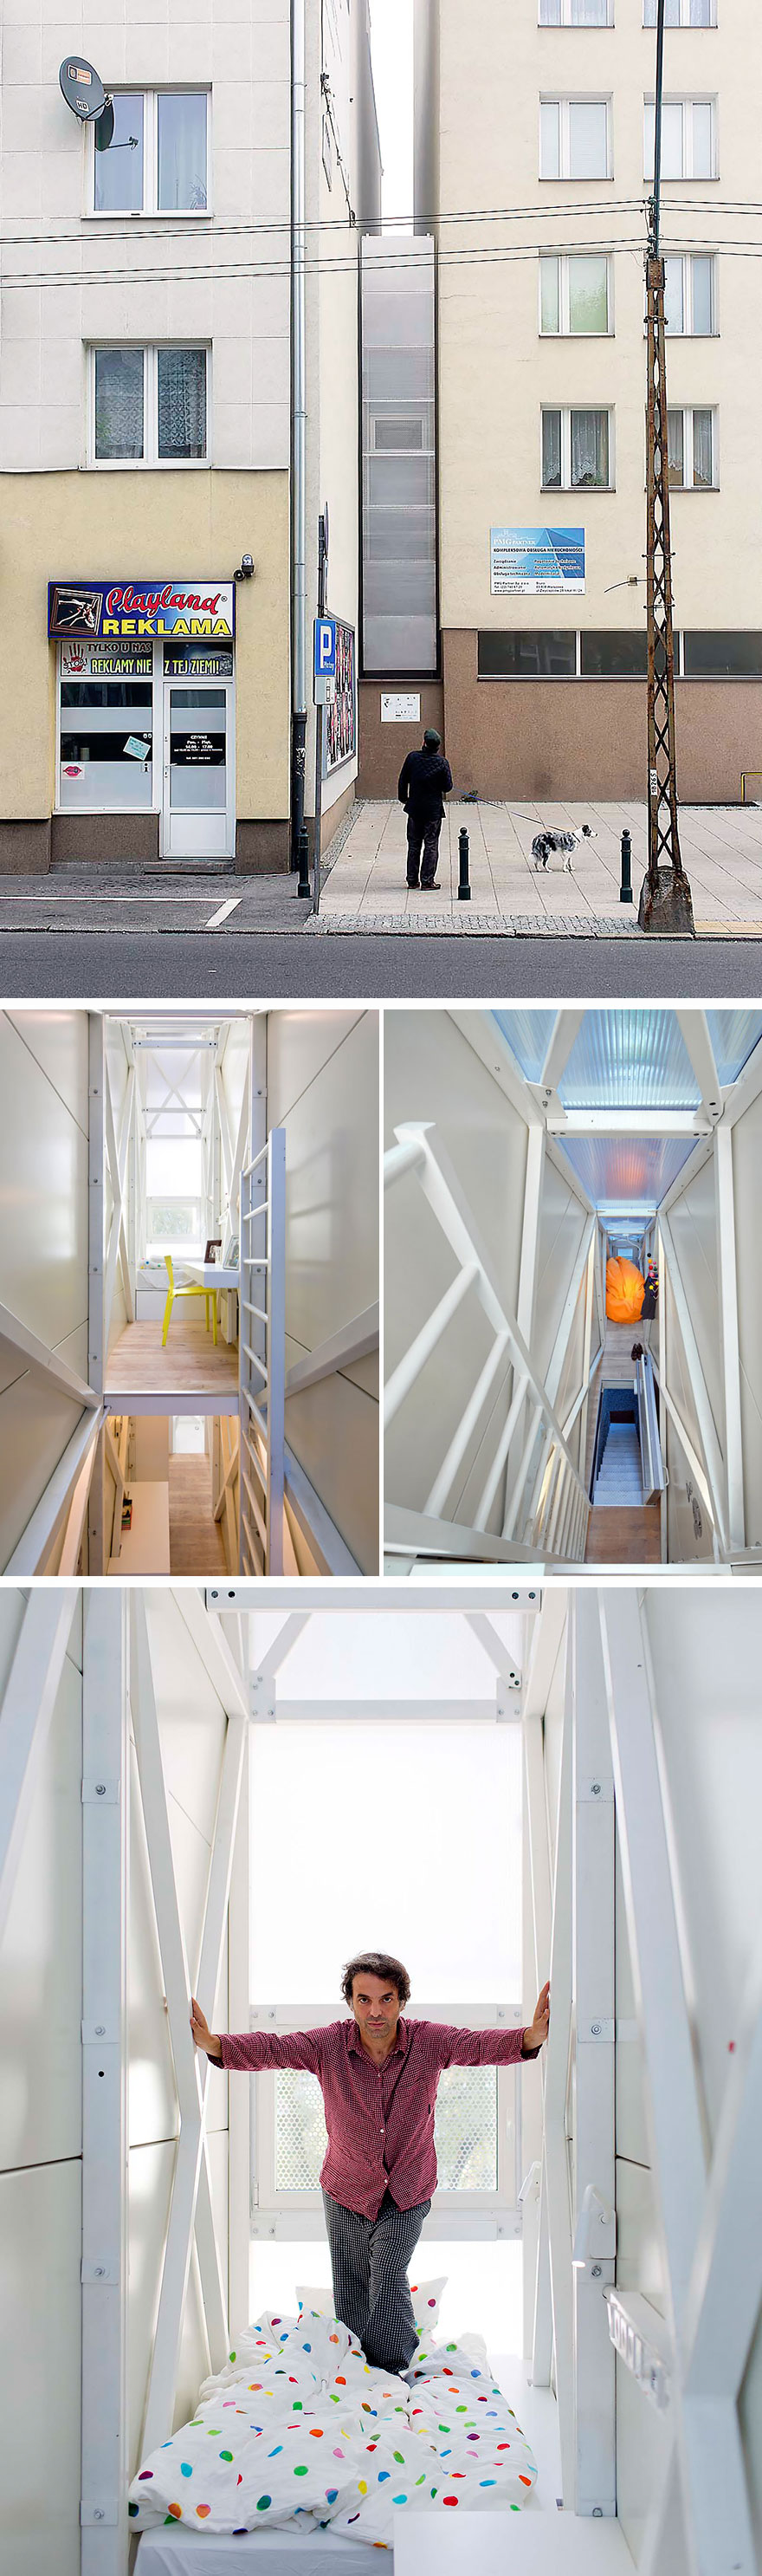 The Keret House in Warsaw